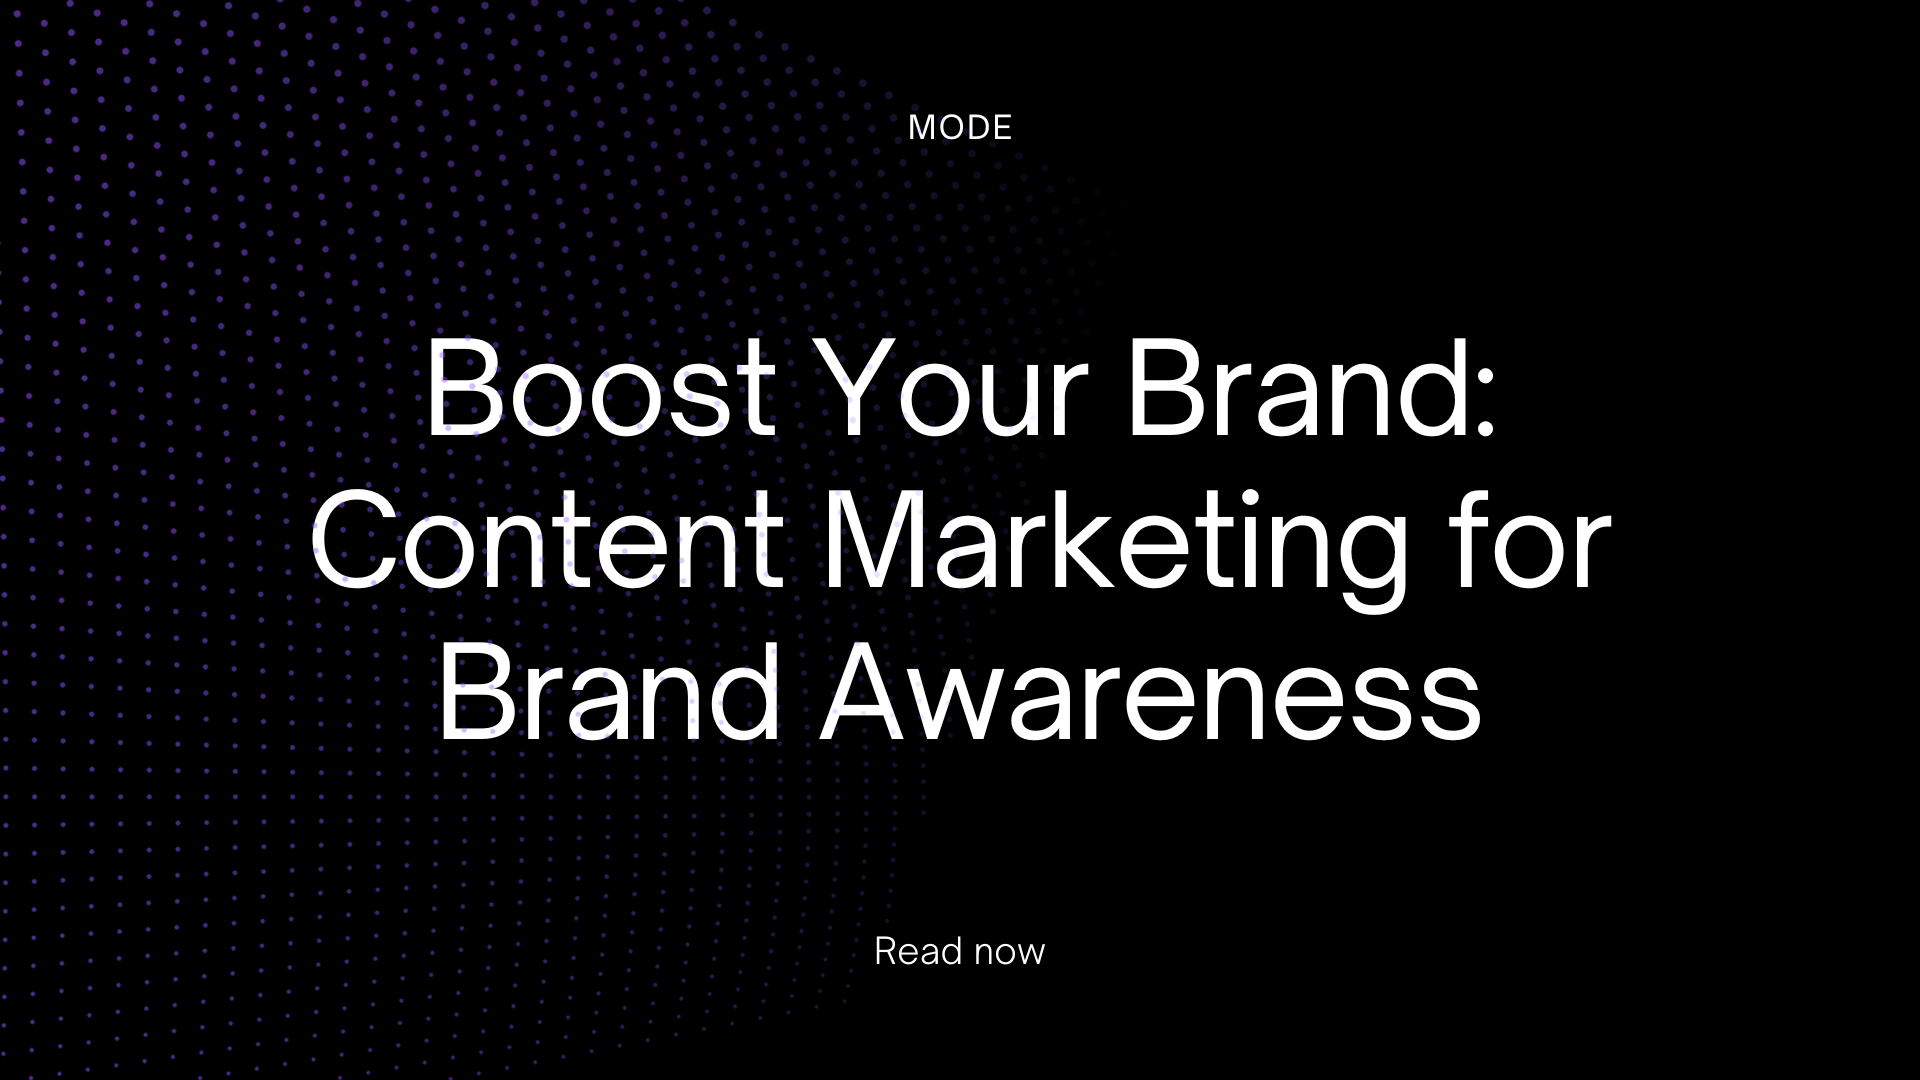 Boost Your Brand: Content Marketing for Brand Awareness